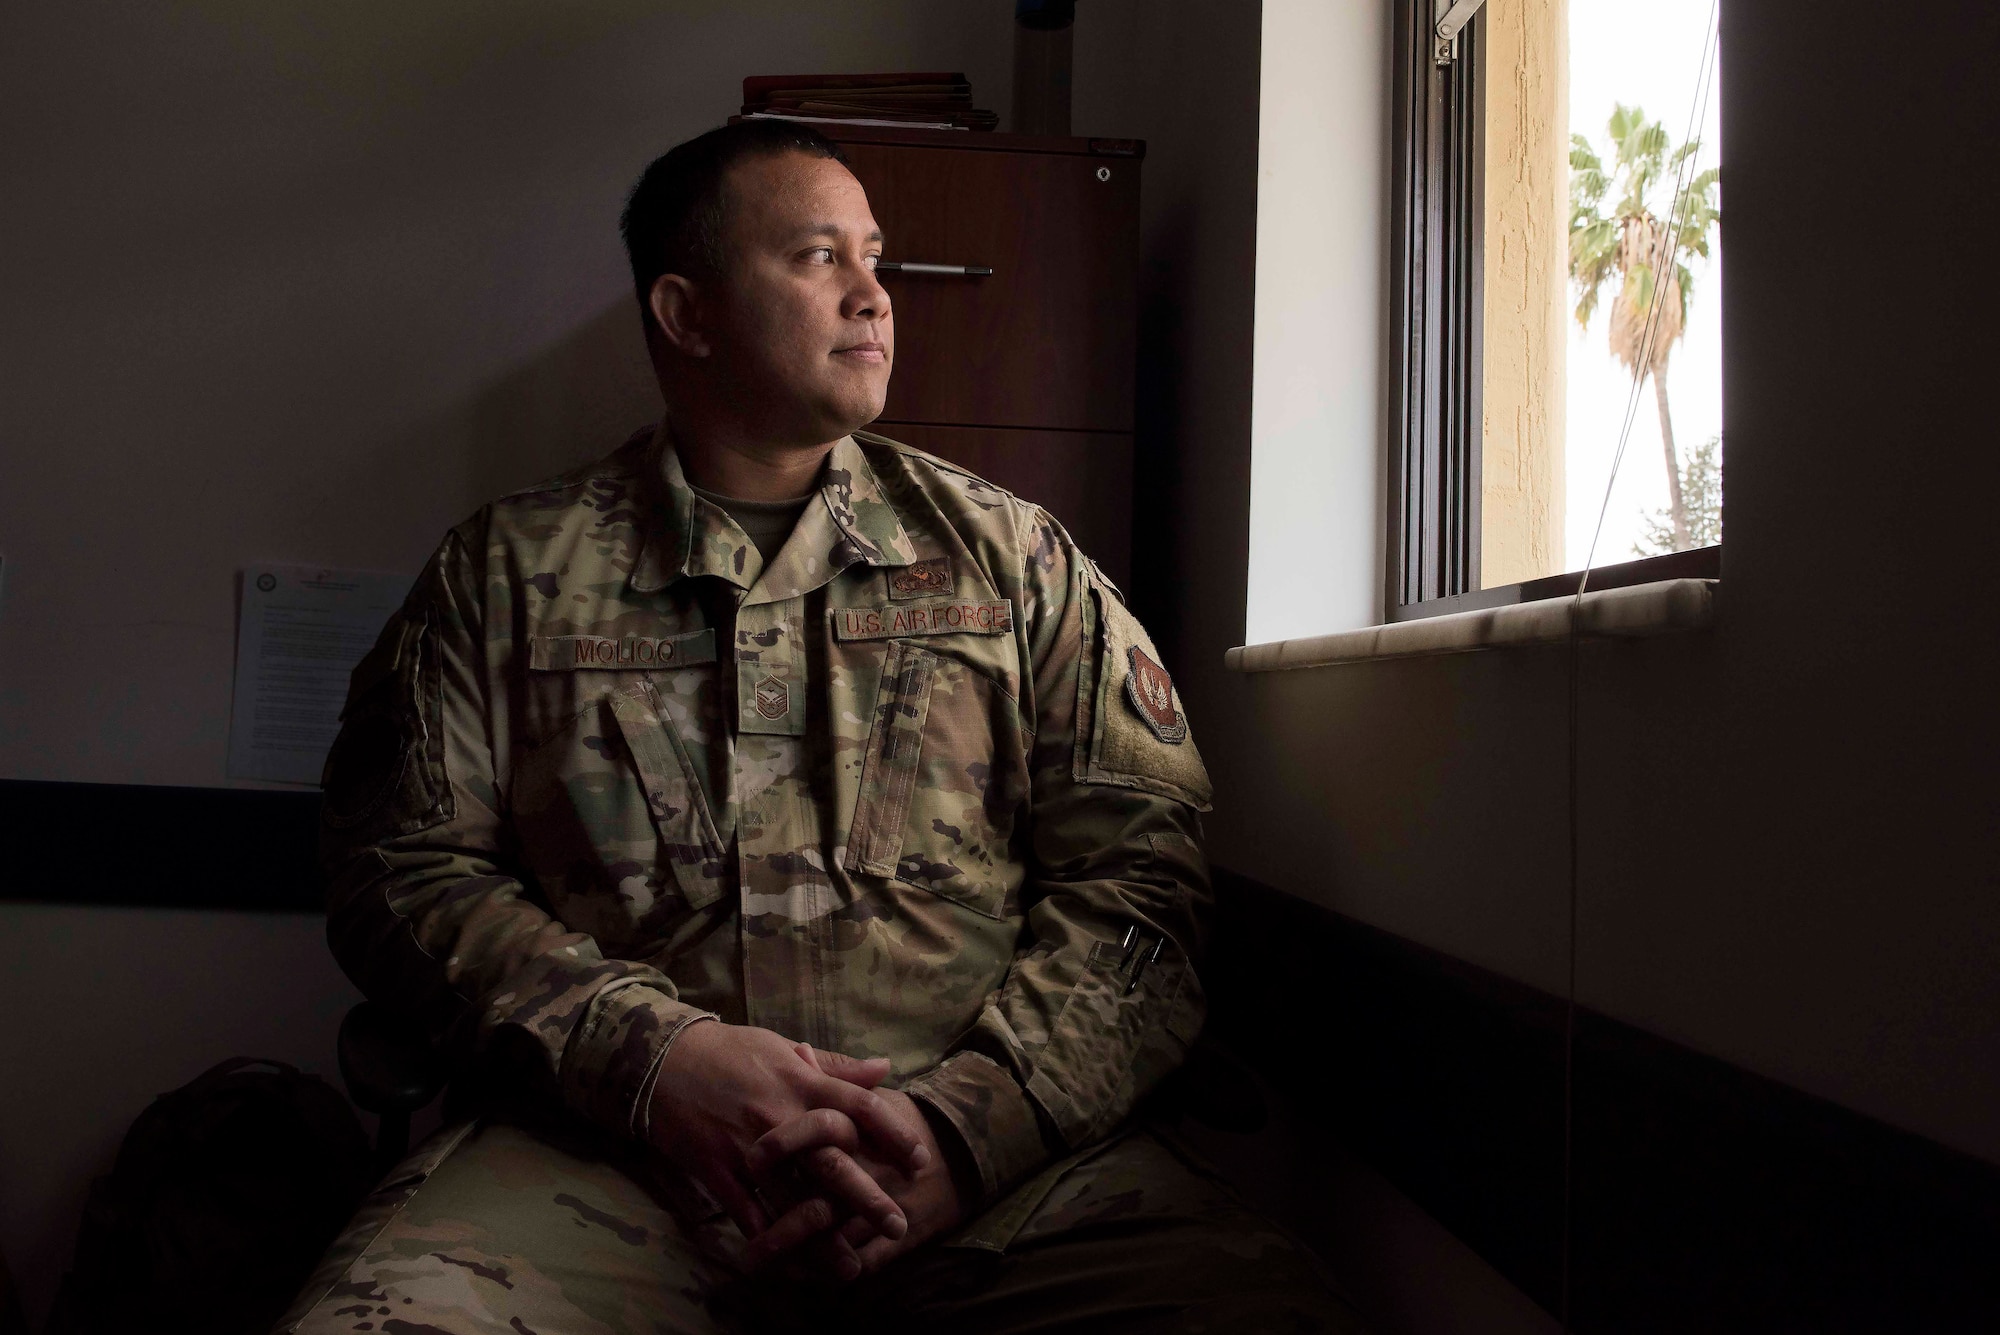 U.S. Air Force Master Sgt. Teve Molioo, 39th Communications Squadron first sergeant, stares out of a window, March 31, 2020, at Incirlik Air Base, Turkey. As a first sergeant, Molioo advises his commander on matters of good order and discipline, as well as providing the commander with the pulse of morale and welfare in the unit. (U.S. Air Force photo by Staff Sgt. Joshua Magbanua)